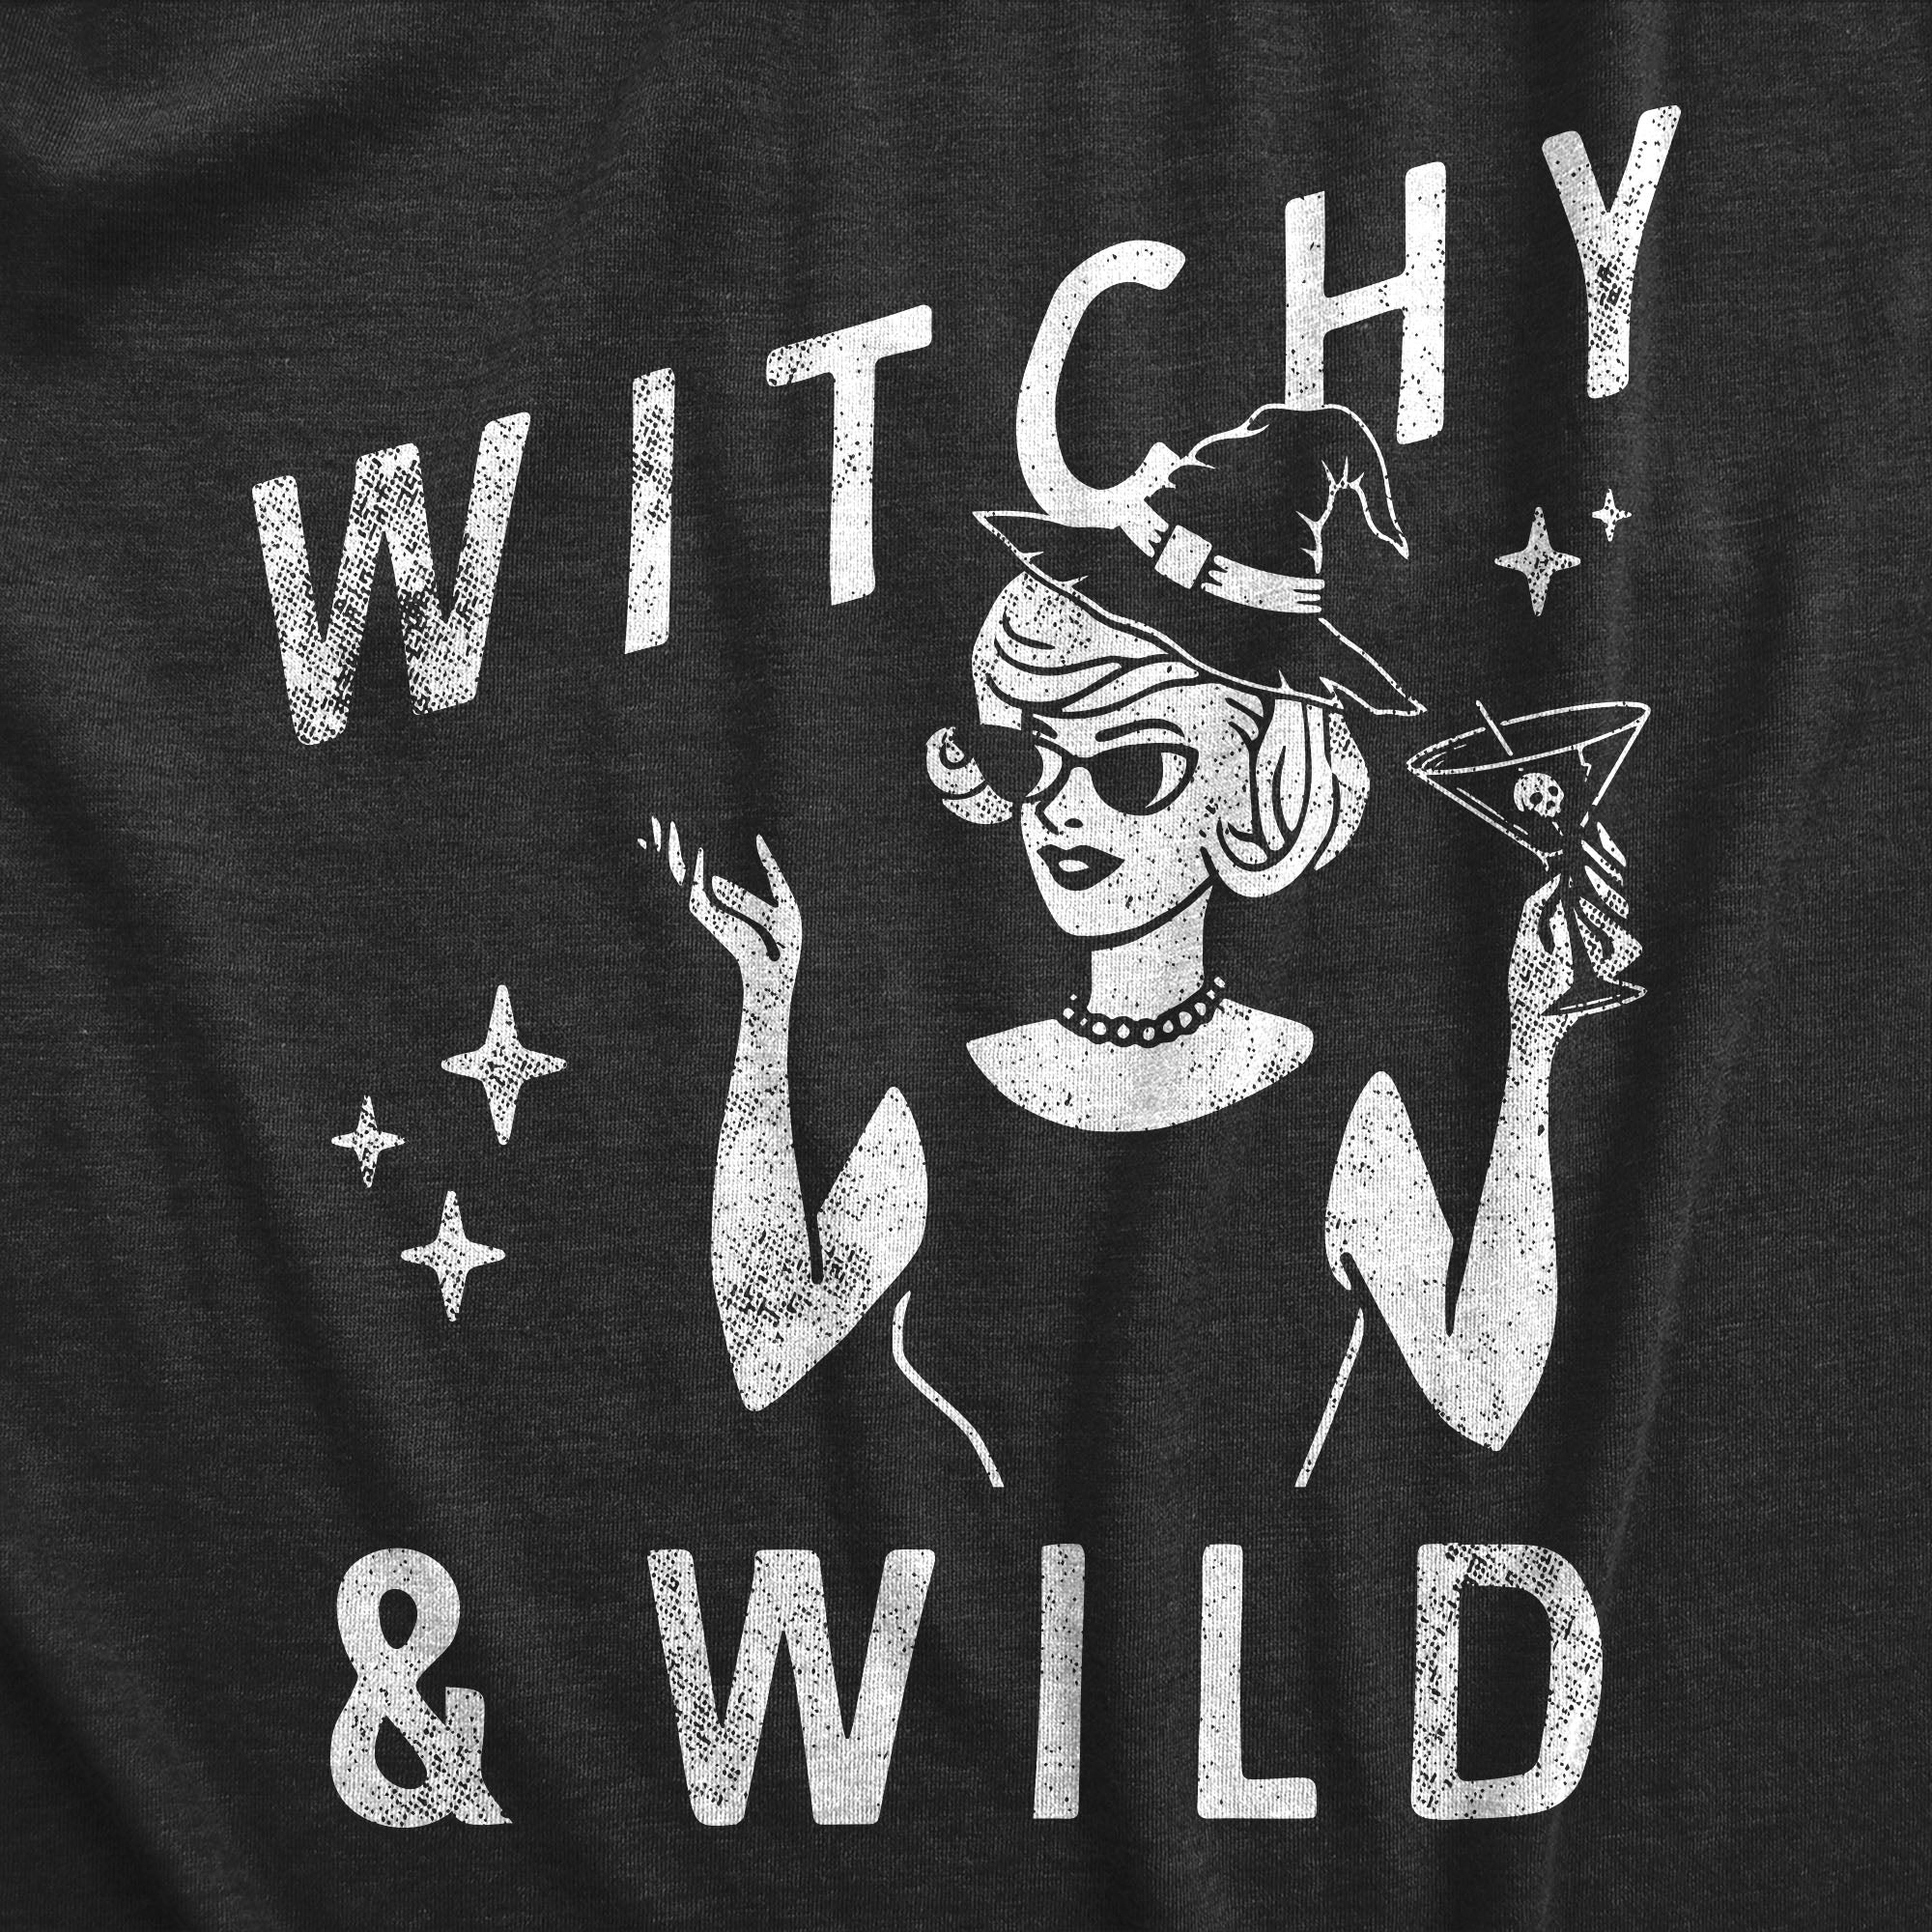 Funny Heather Black - WITCHY Witchy And Wild Womens T Shirt Nerdy Halloween Drinking Tee